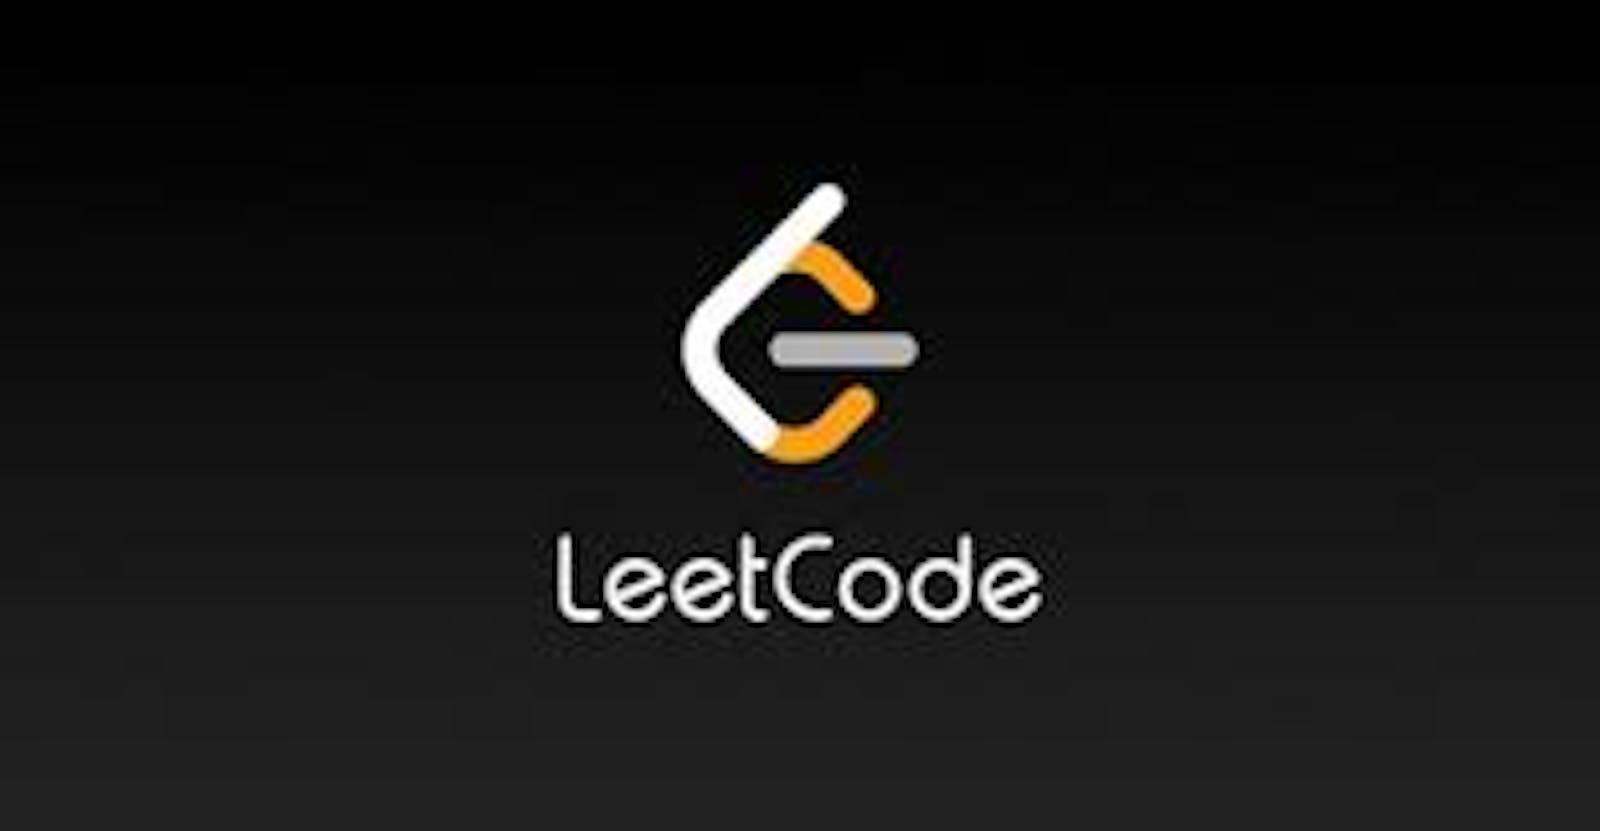 How to use leetcode effectively :